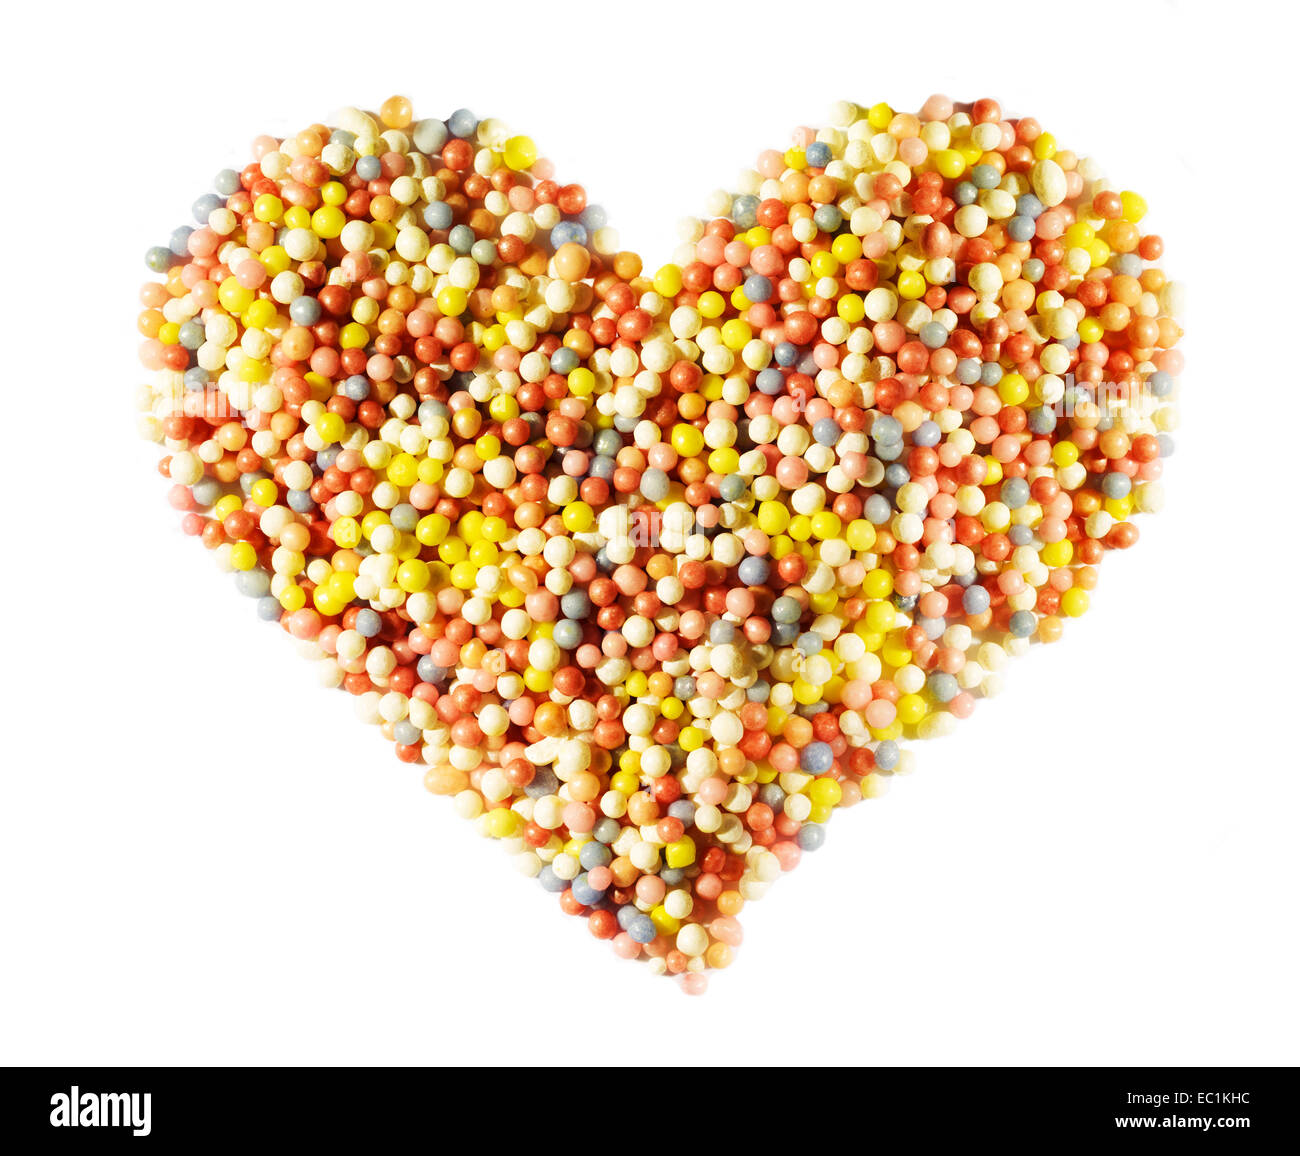 Heart shape made from 100's and 1000's sugar balls. Stock Photo